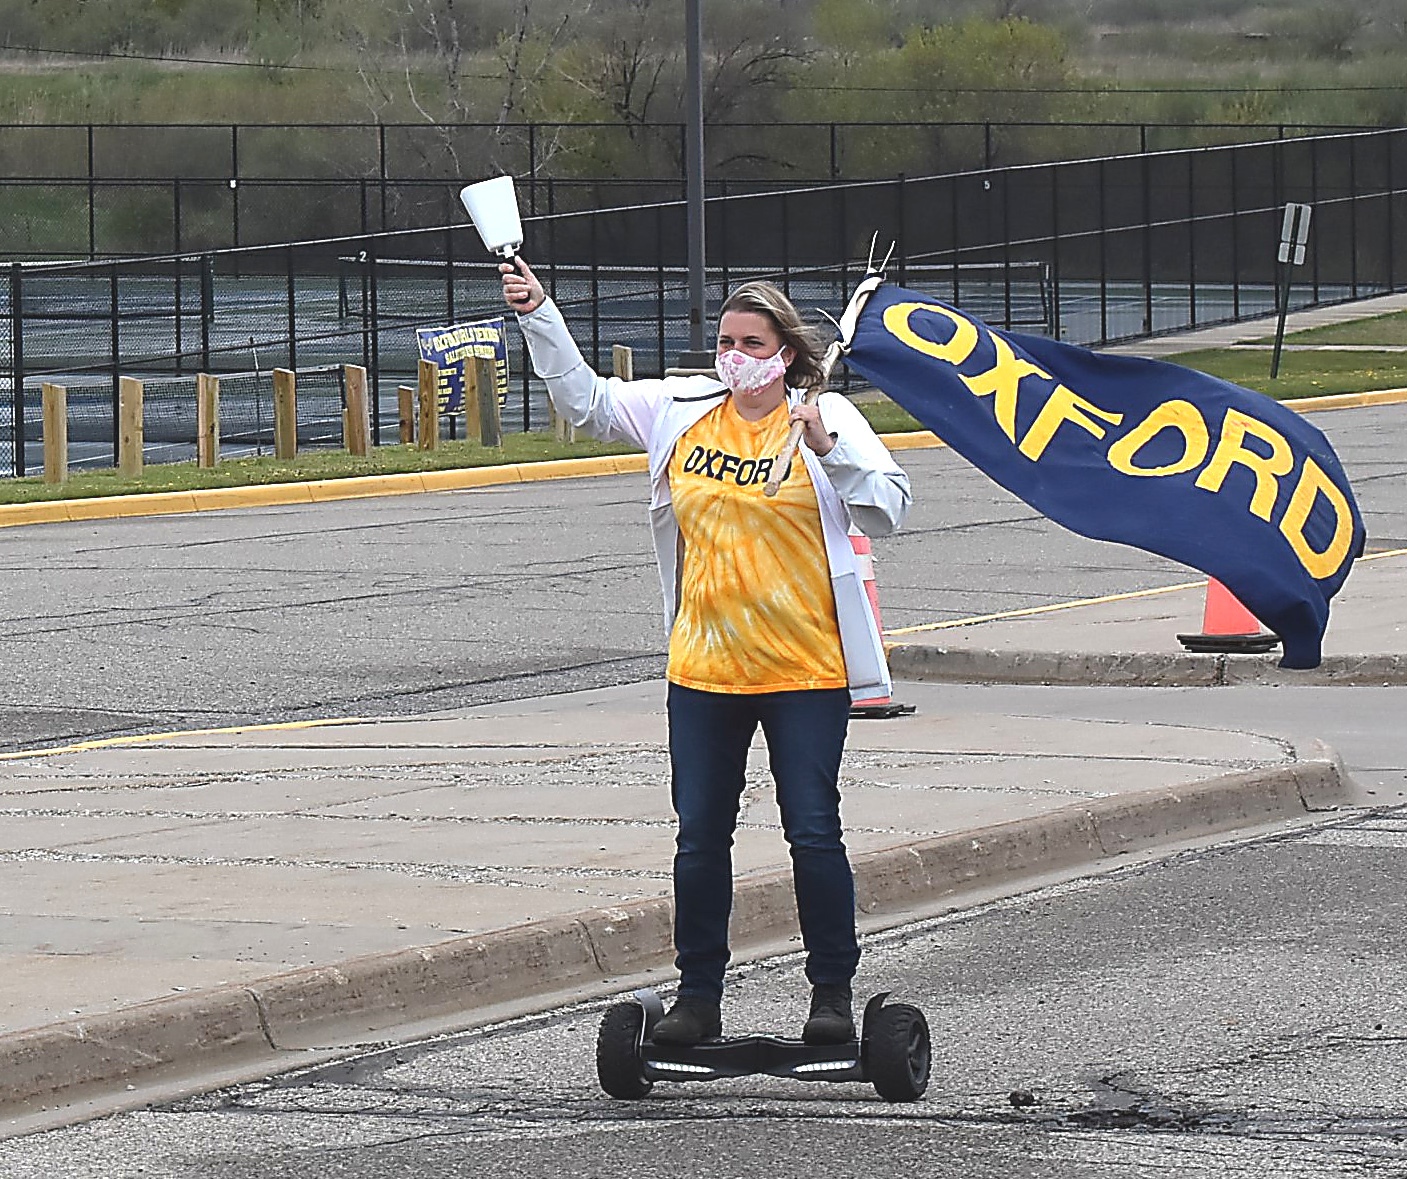 Brandishing a cowbell and banner from a segway, special education teacher Julie Beebe was the first to greet the seniors as they pulled into the parking lot.